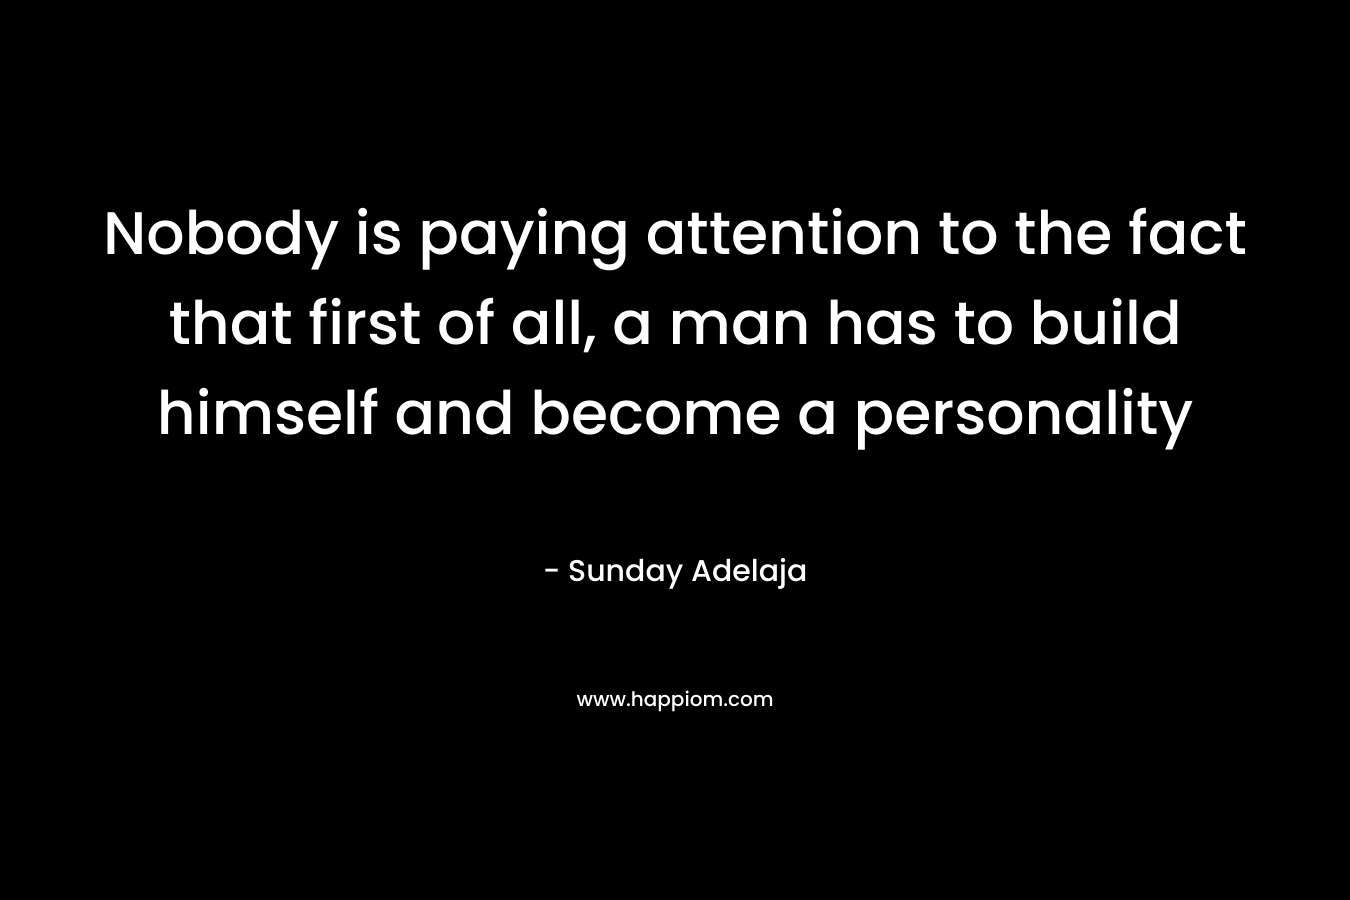 Nobody is paying attention to the fact that first of all, a man has to build himself and become a personality